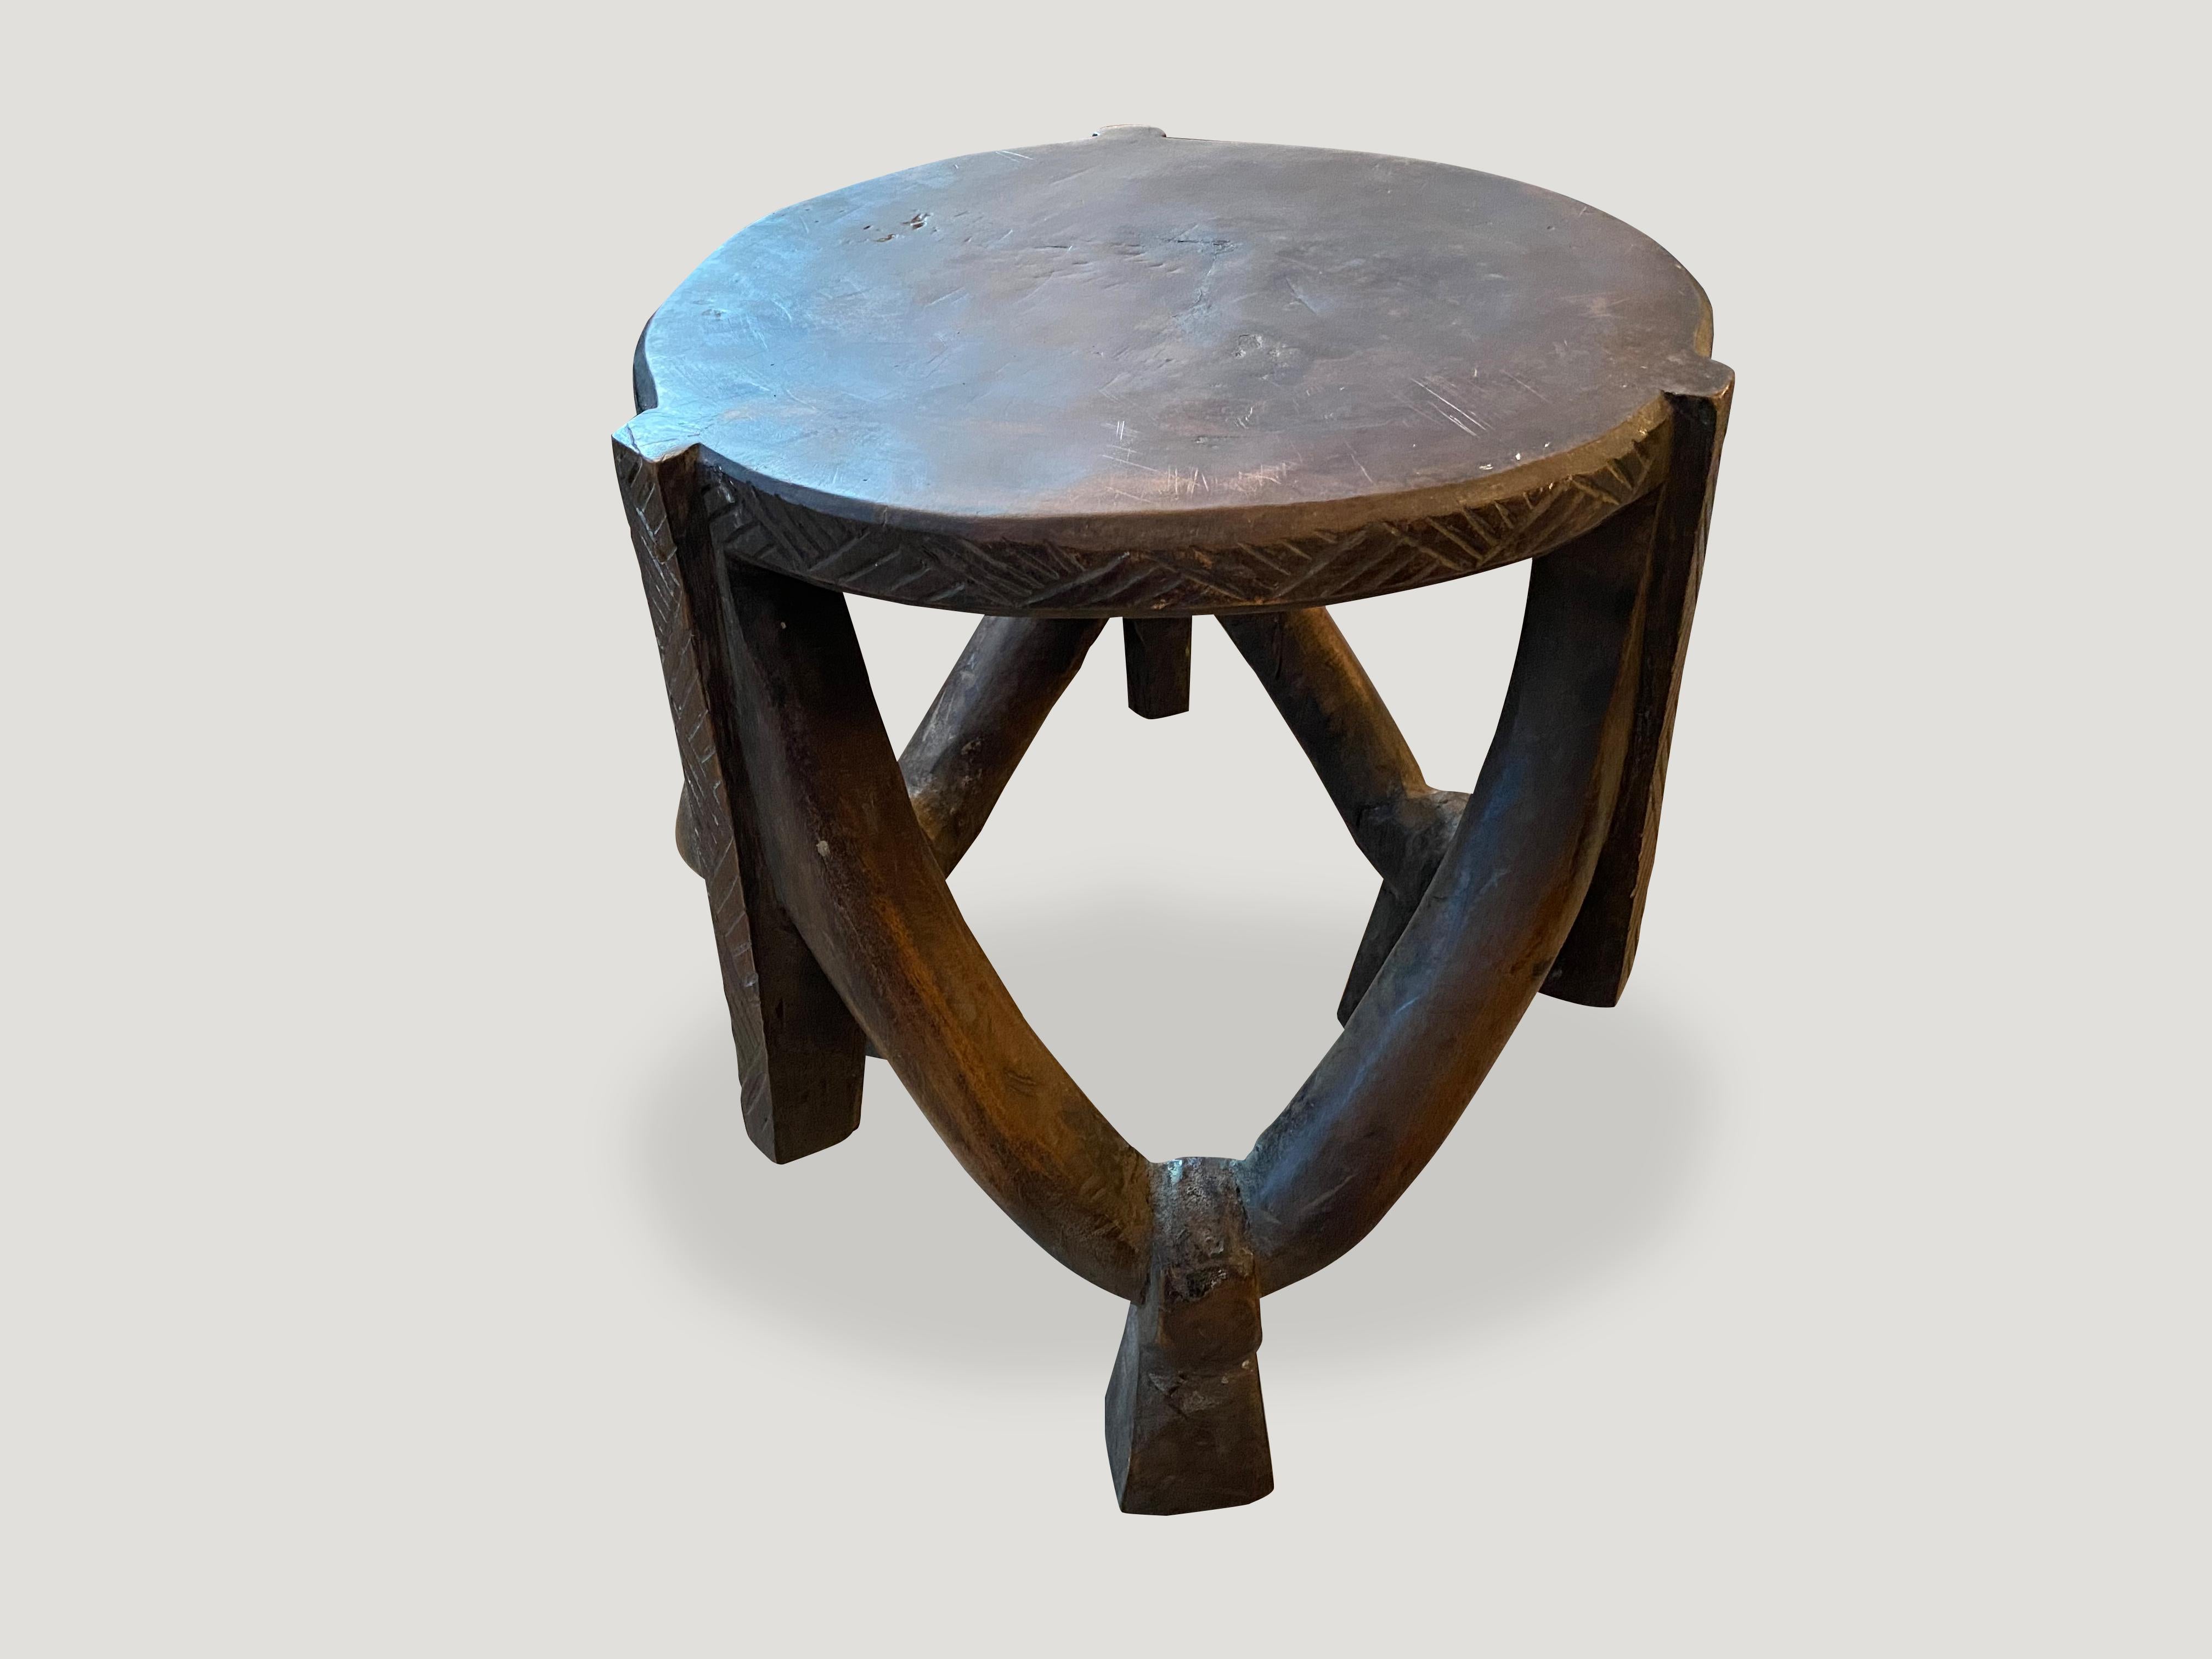 Impressive antique African mahogany side table or stool, hand carved from a single block of mahogany wood. Great for placing a book or perhaps towels in a bathroom, magazines etc. A beautiful, versatile item that is both sculptural and usable.